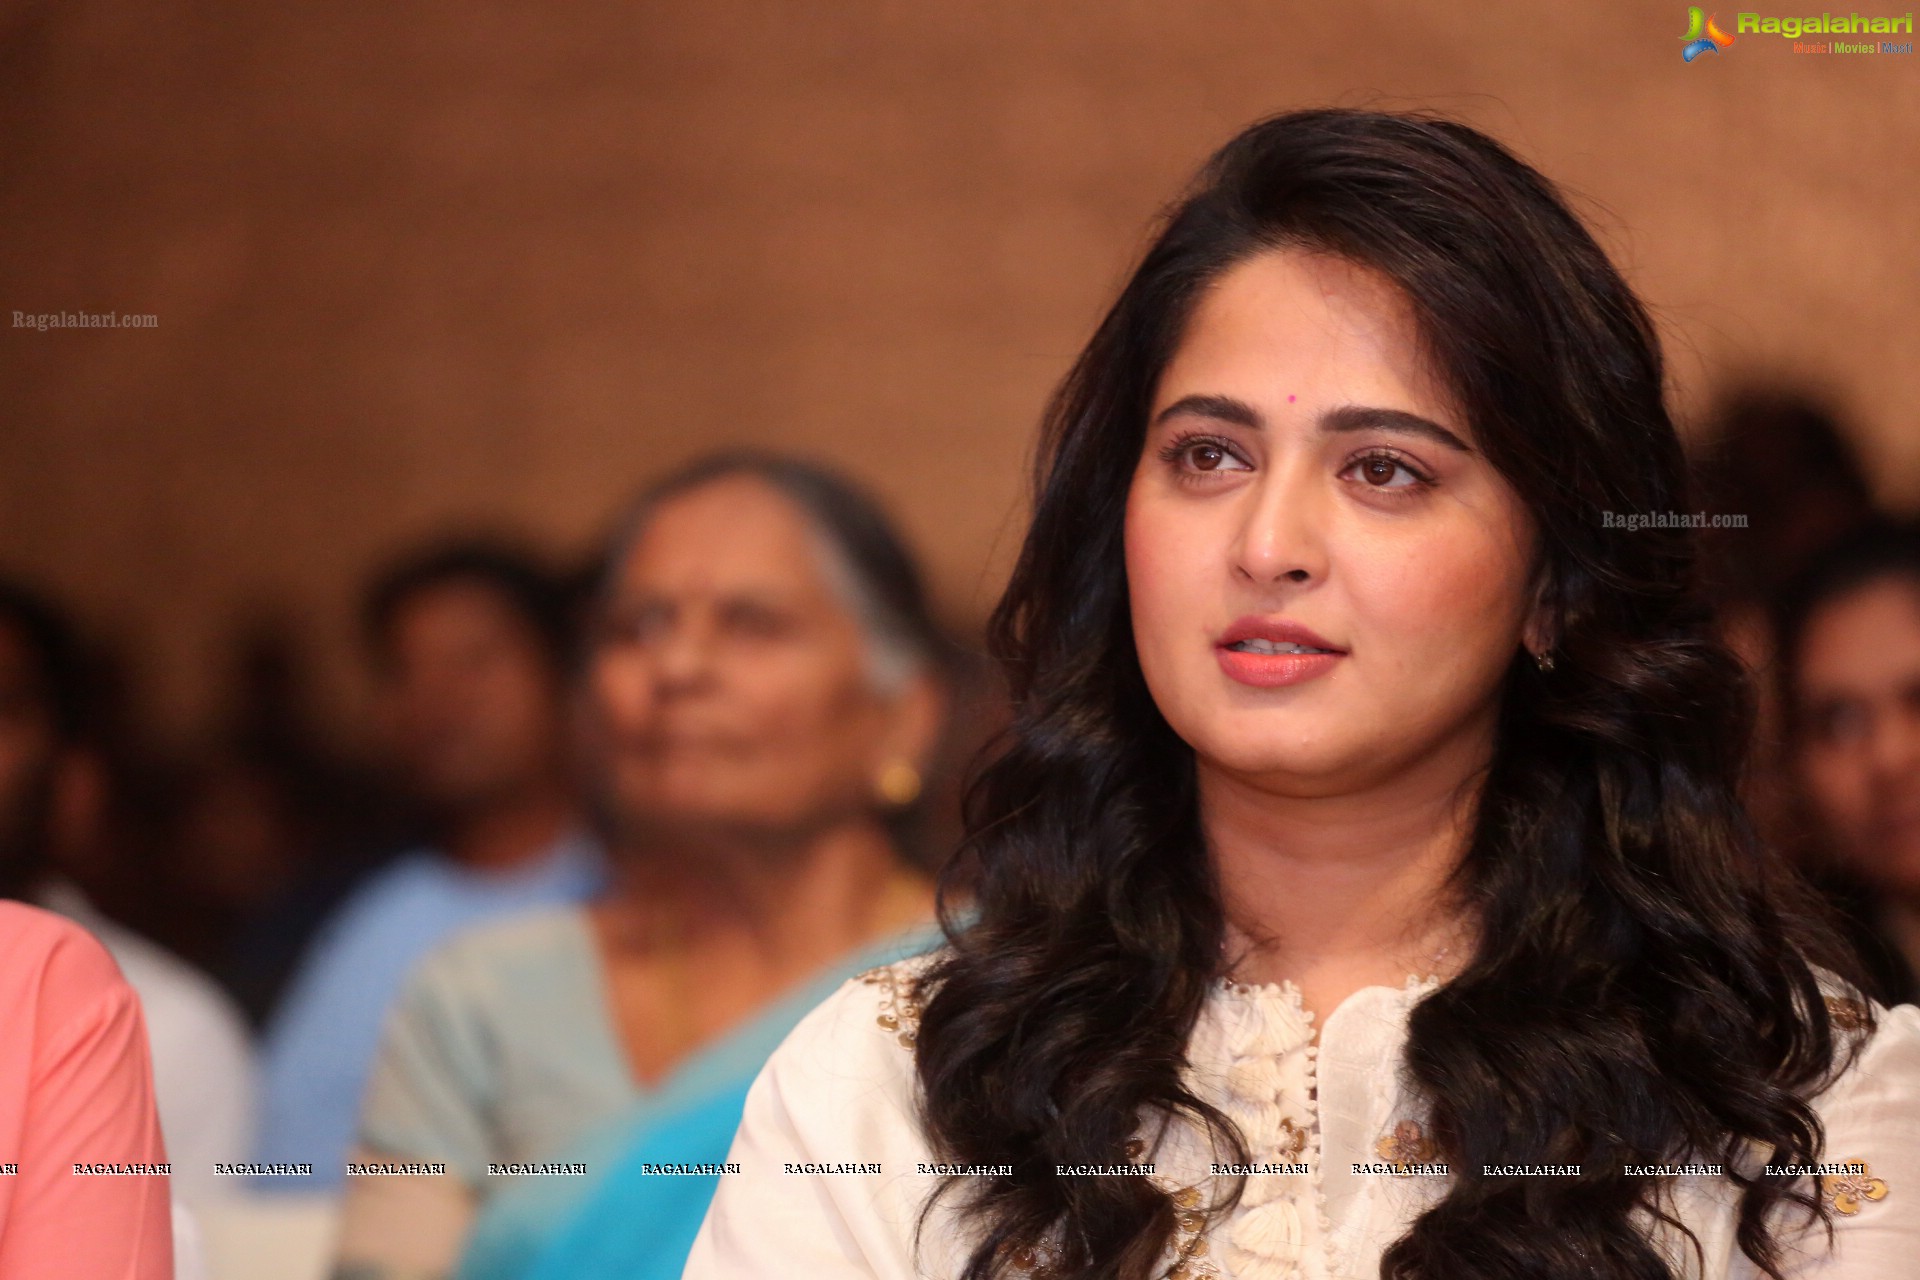 Anushka Shetty at Bhaagamathie Pre-Release Event (High Definition)